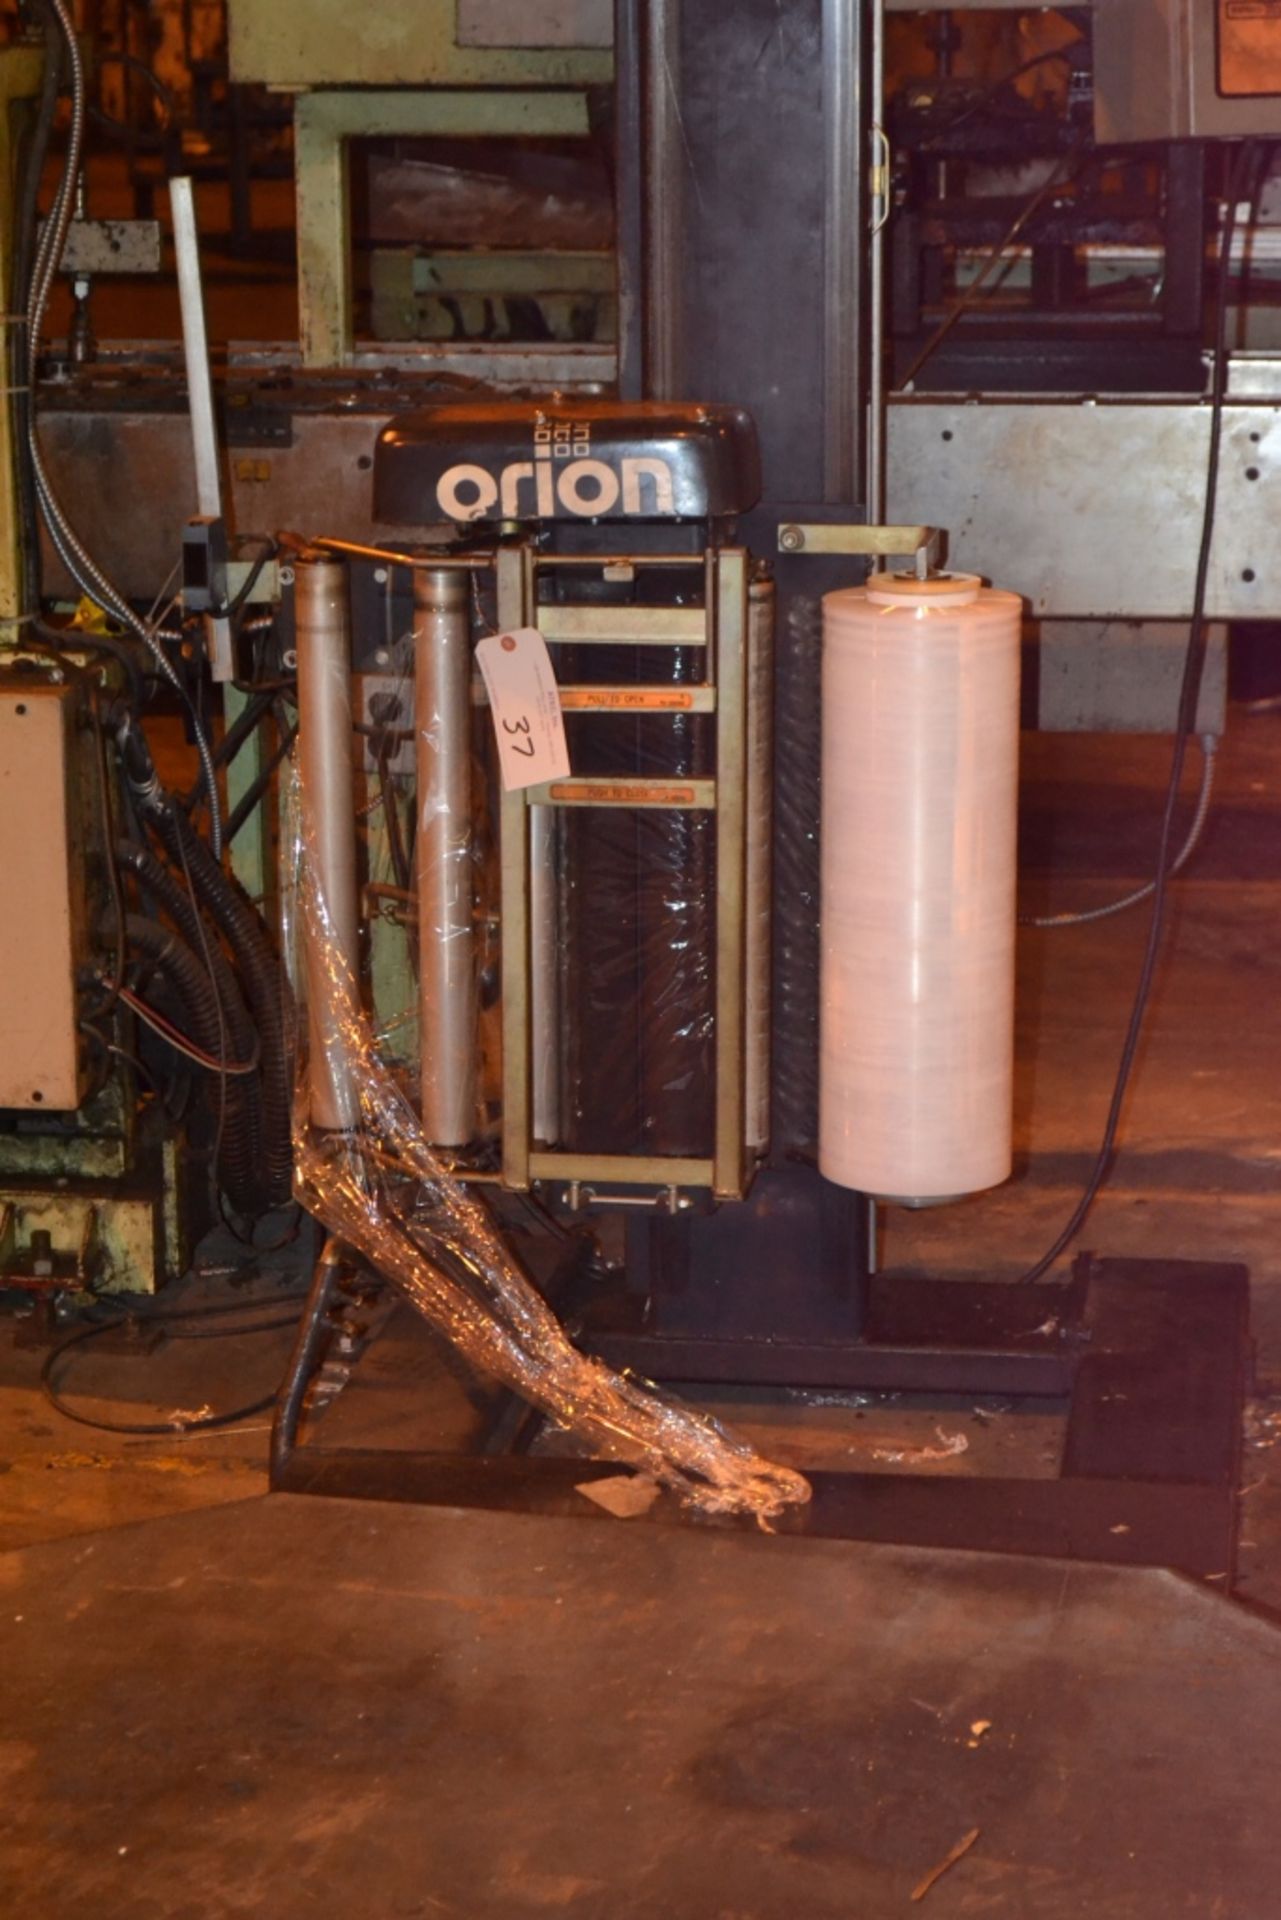 Orion Model H66/17 Automatic Stretch Wrapper, 48" x 48" Turntable, S/N 2002-1112904; w/(4) Rolls - Image 3 of 6